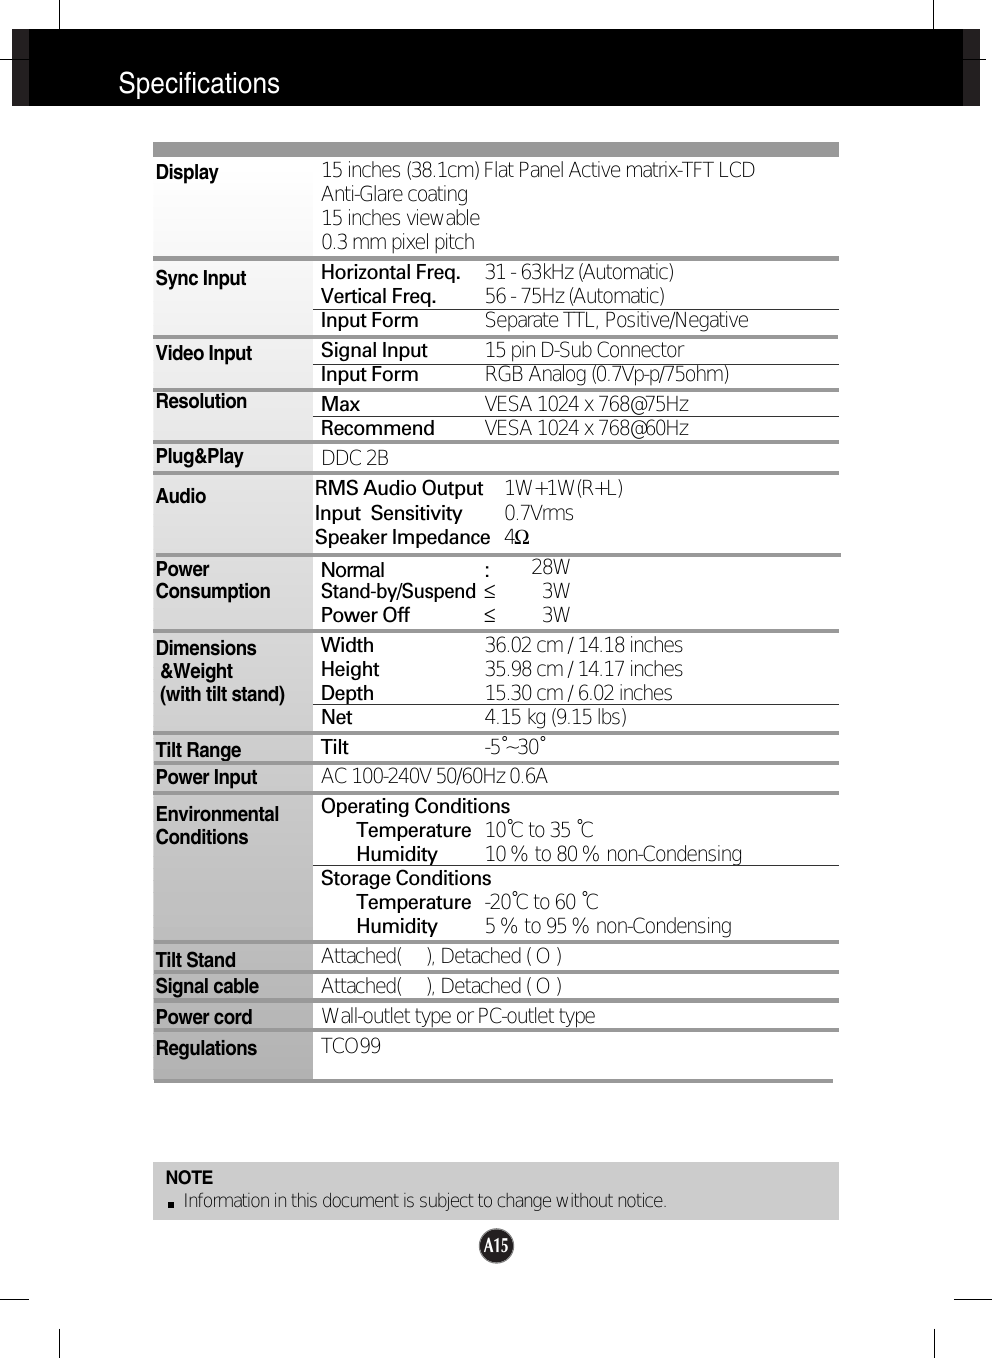 A15SpecificationsNOTEInformation in this document is subject to change without notice.15 inches (38.1cm) Flat Panel Active matrix-TFT LCD Anti-Glare coating15 inches viewable0.3 mm pixel pitchHorizontal Freq. 31 - 63kHz (Automatic)Vertical Freq. 56 - 75Hz (Automatic)Input Form Separate TTL, Positive/NegativeSignal Input 15 pin D-Sub ConnectorInput Form RGB Analog (0.7Vp-p/75ohm)Max VESA 1024 x 768@75Hz Recommend VESA 1024 x 768@60HzDDC 2BRMS Audio Output 1W+1W(R+L)Input  Sensitivity 0.7VrmsSpeaker Impedance 4ΩNormal :28WStand-by/Suspend≤3WPower Off ≤3WWidth 36.02 cm / 14.18 inchesHeight 35.98 cm / 14.17 inchesDepth 15.30 cm / 6.02 inchesNet 4.15 kg (9.15 lbs)Tilt -5˚~30˚AC 100-240V 50/60Hz 0.6AOperating ConditionsTemperature 10˚C to 35 ˚CHumidity 10 % to 80 % non-CondensingStorage ConditionsTemperature -20˚C to 60 ˚CHumidity 5 % to 95 % non-CondensingAttached(     ), Detached ( O )Attached(     ), Detached ( O )Wall-outlet type or PC-outlet typeTCO99DisplaySync InputVideo InputResolutionPlug&amp;PlayAudioPowerConsumptionDimensions&amp;Weight(with tilt stand)Tilt RangePower InputEnvironmentalConditionsTilt StandSignal cablePower cord Regulations